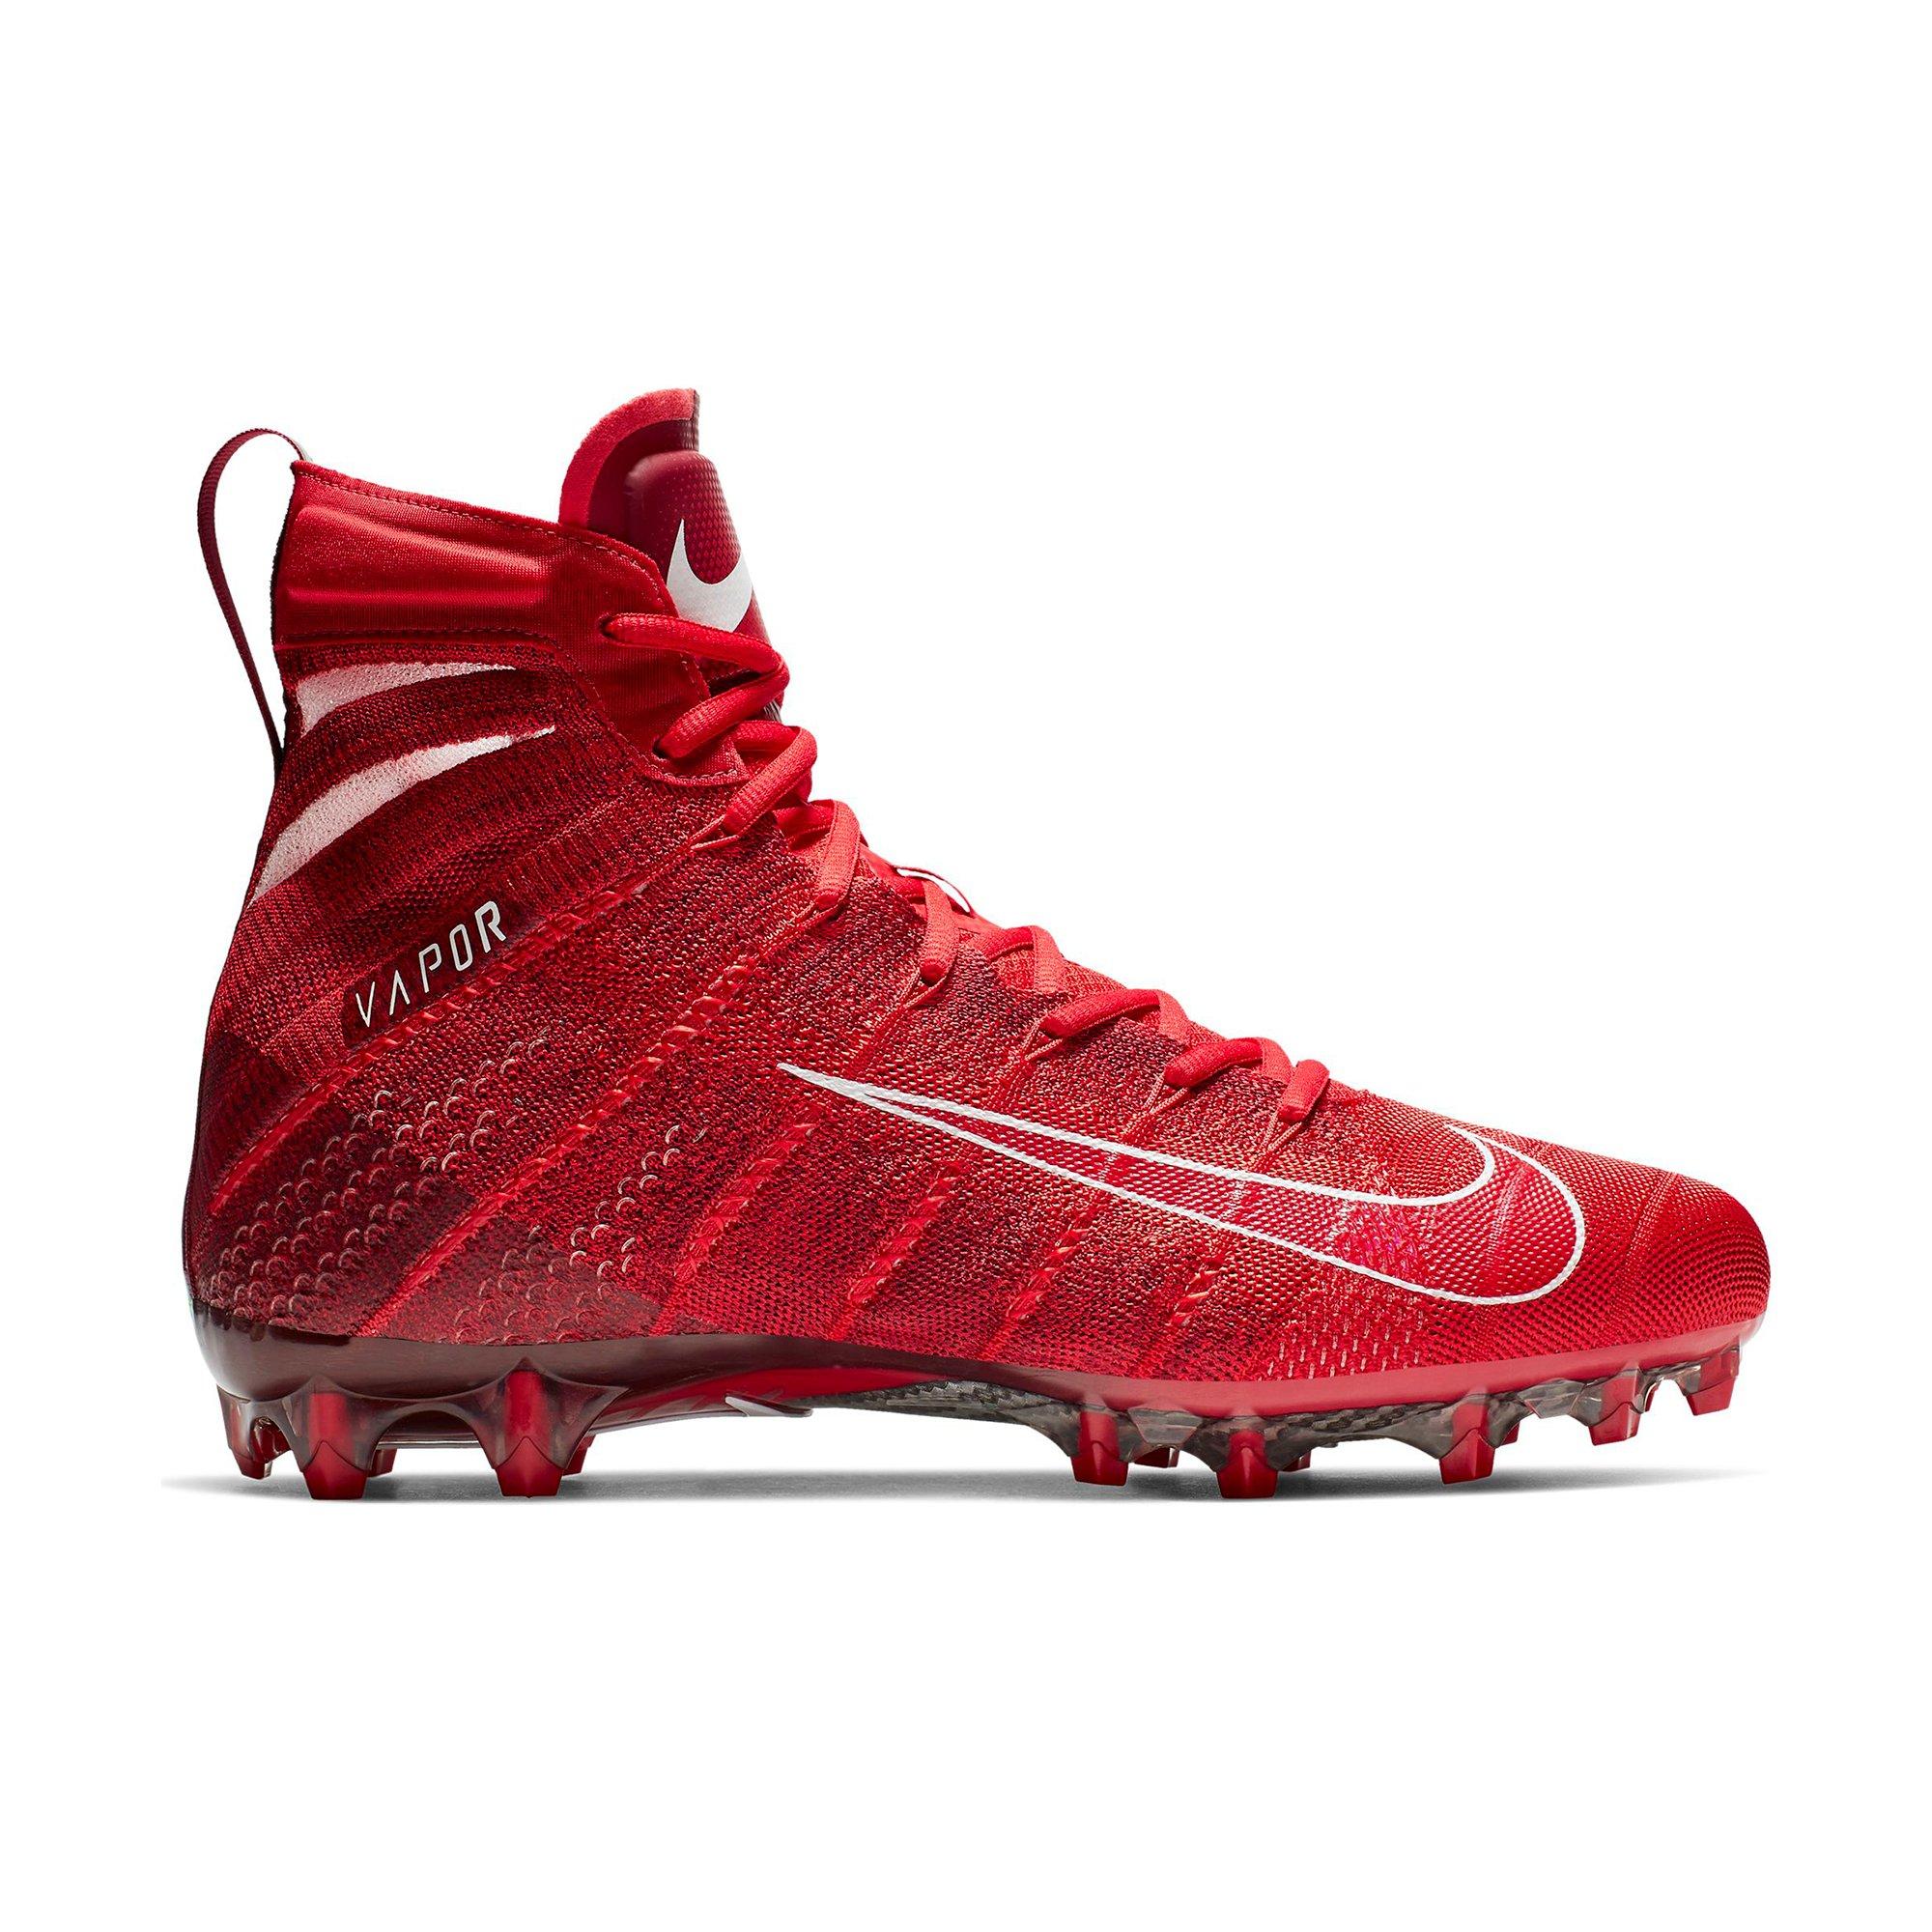 red vapor cleats